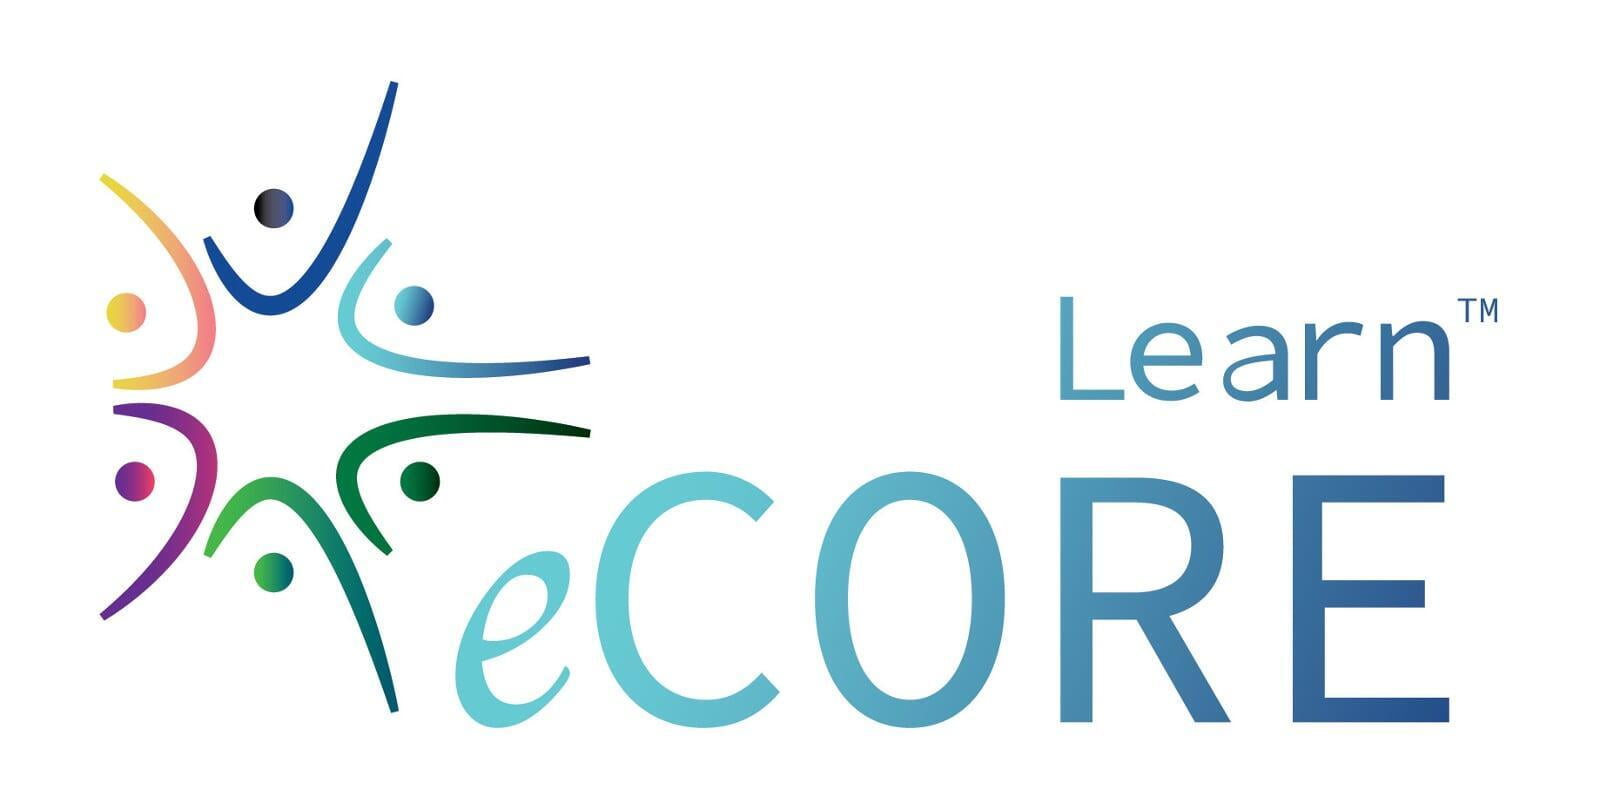 Learn eCORE and EdTek offer HSRT & ICOI Courses for Researchers